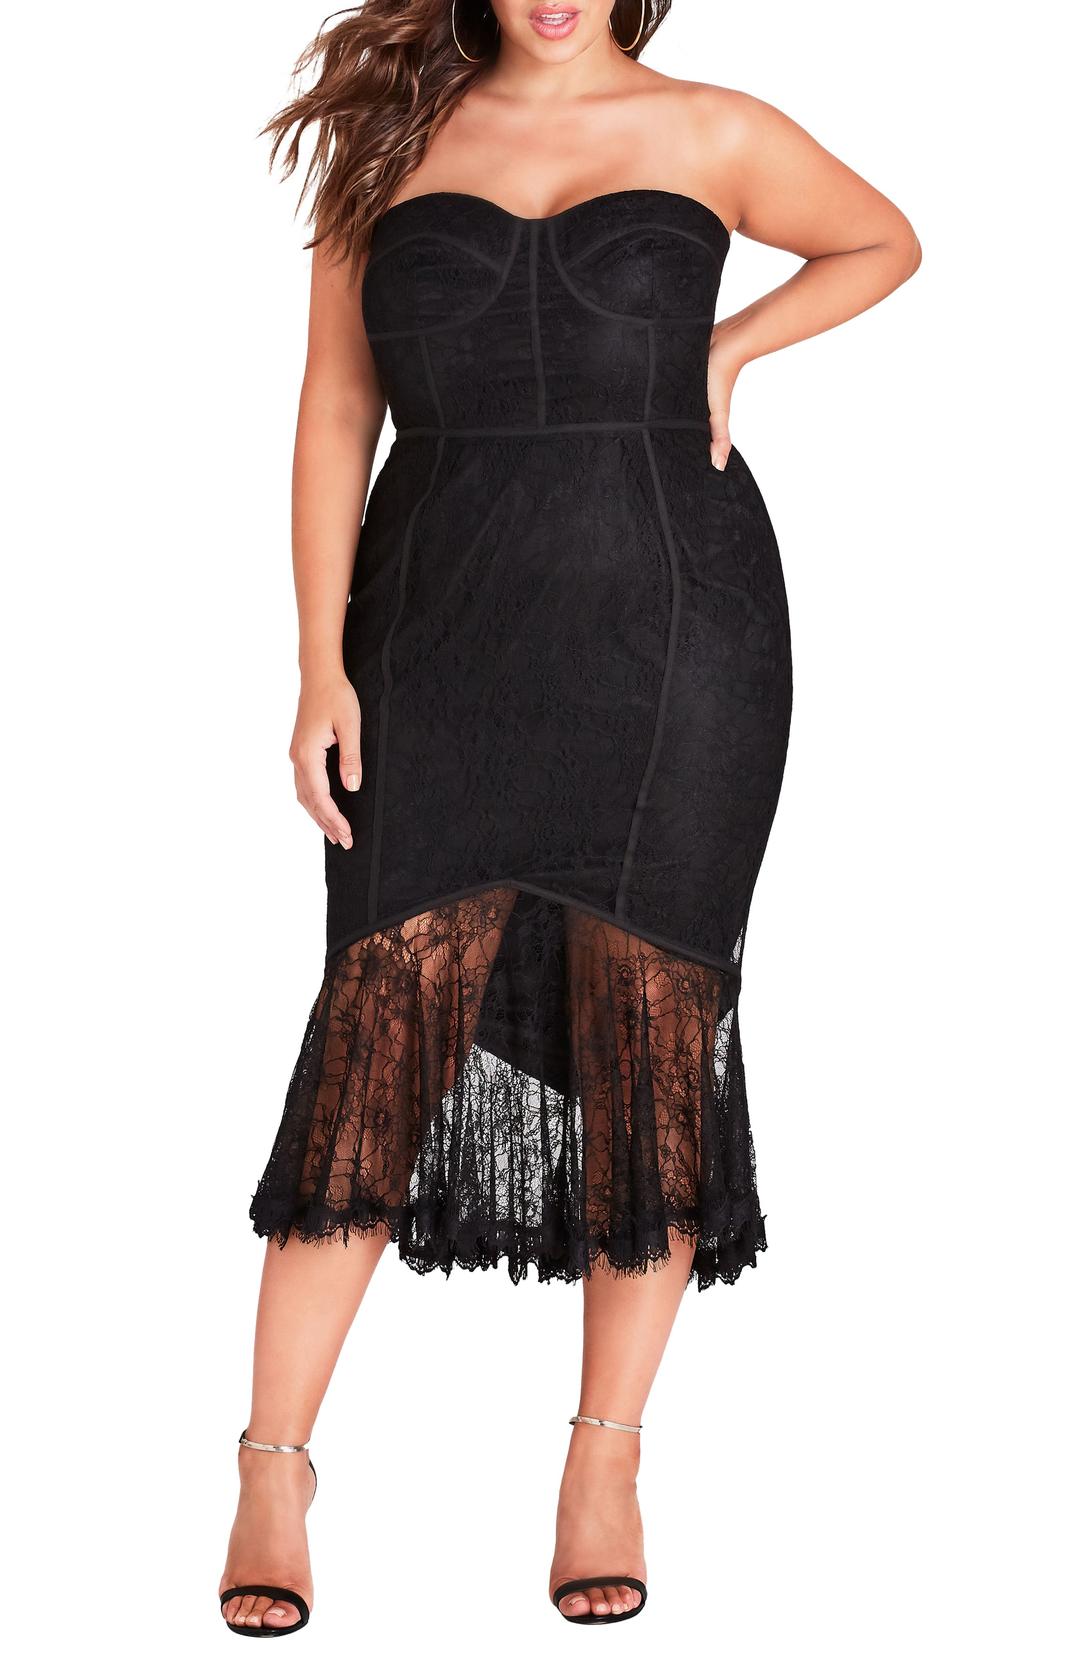 plus size new years eve outfit